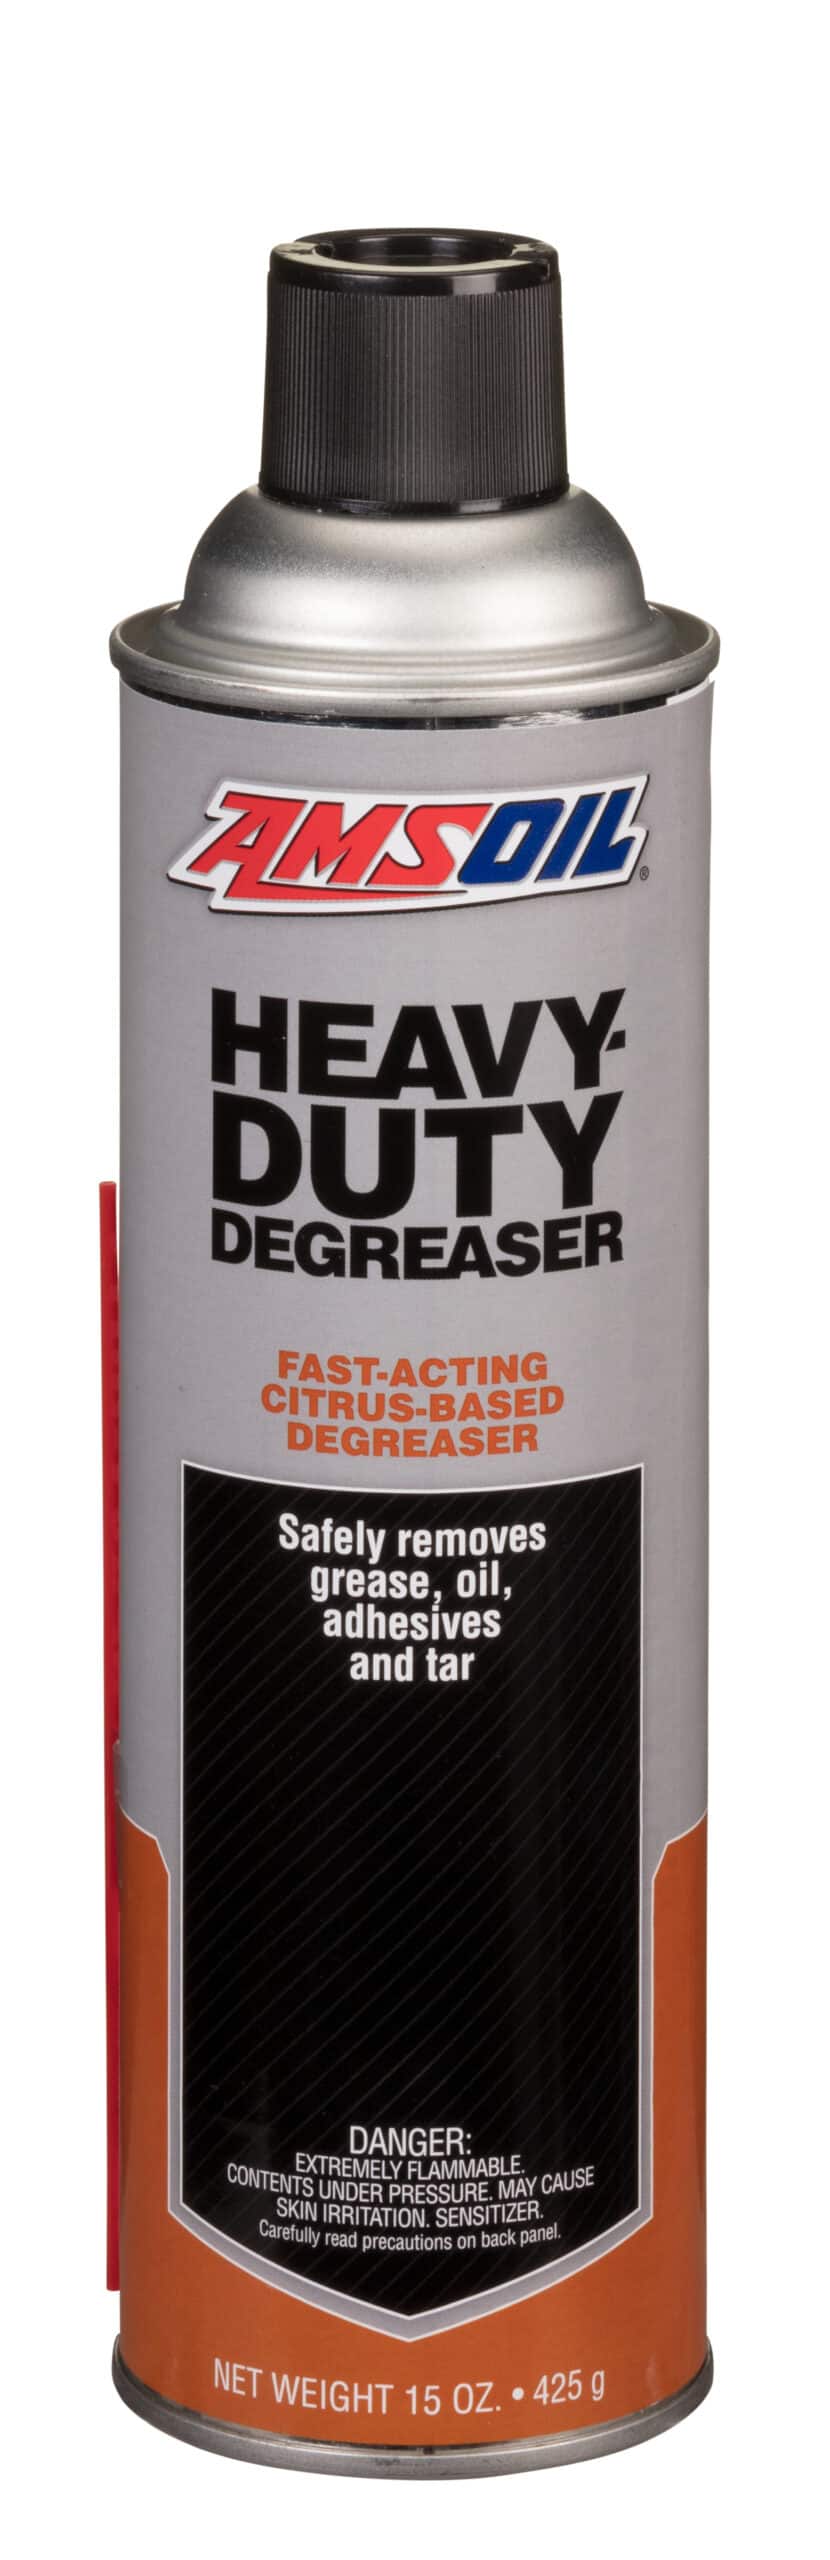 Heavy Duty Degreaser ADGSC scaled